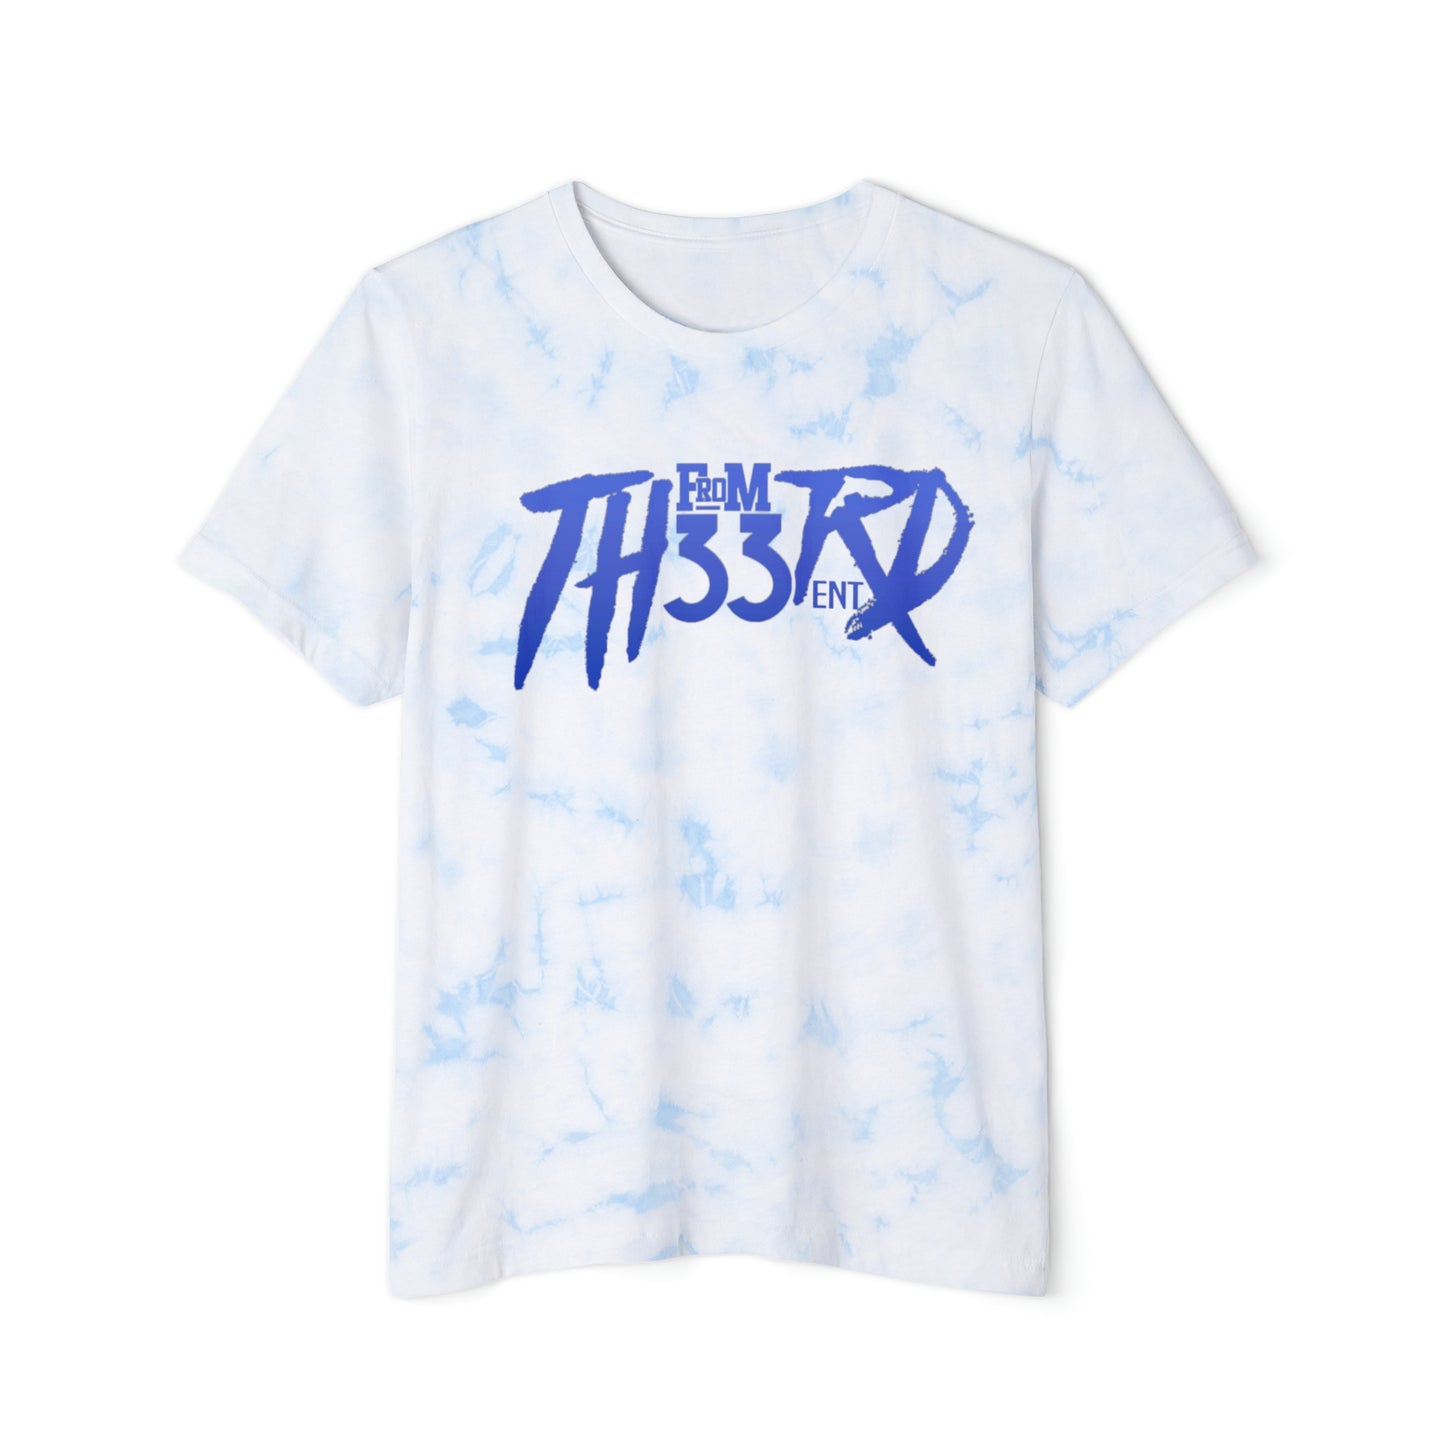 Fromth33rd Tie-Dyed T-Shirt